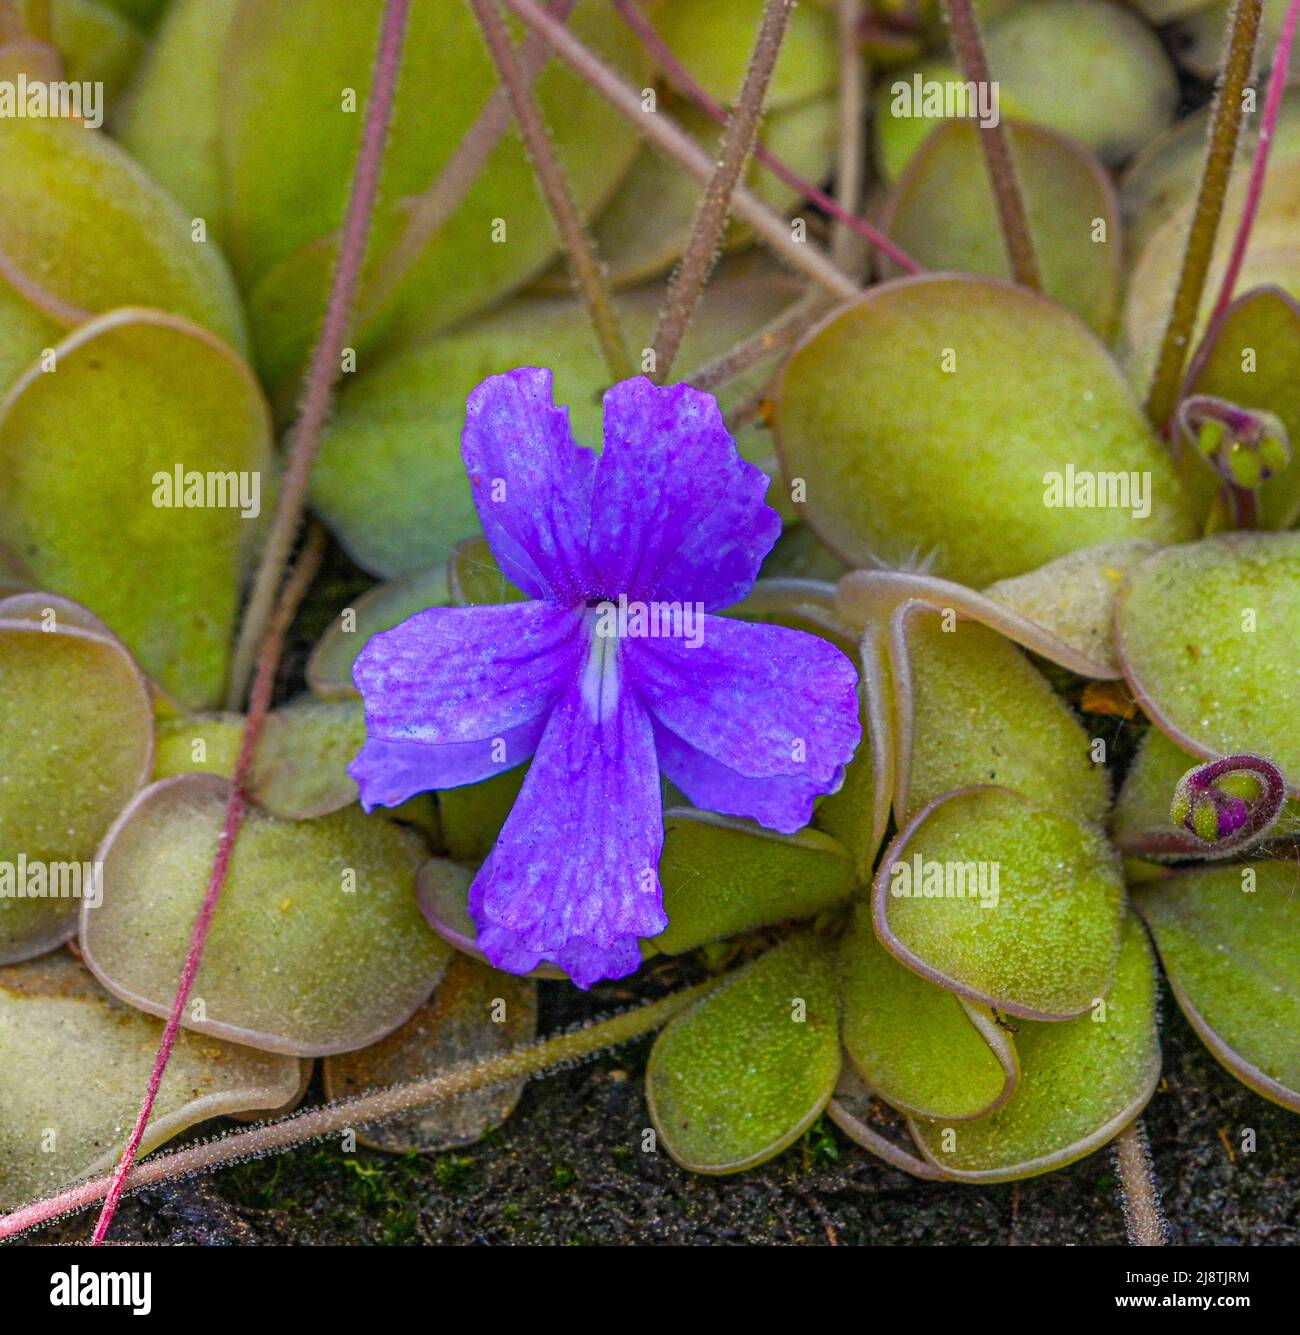 Blossom and leaves of a mexican butterwort (Pinguecula Pinguicula rectifolia). Botanical Garden, KIT Karlsruhe, Germany, Europe Stock Photo